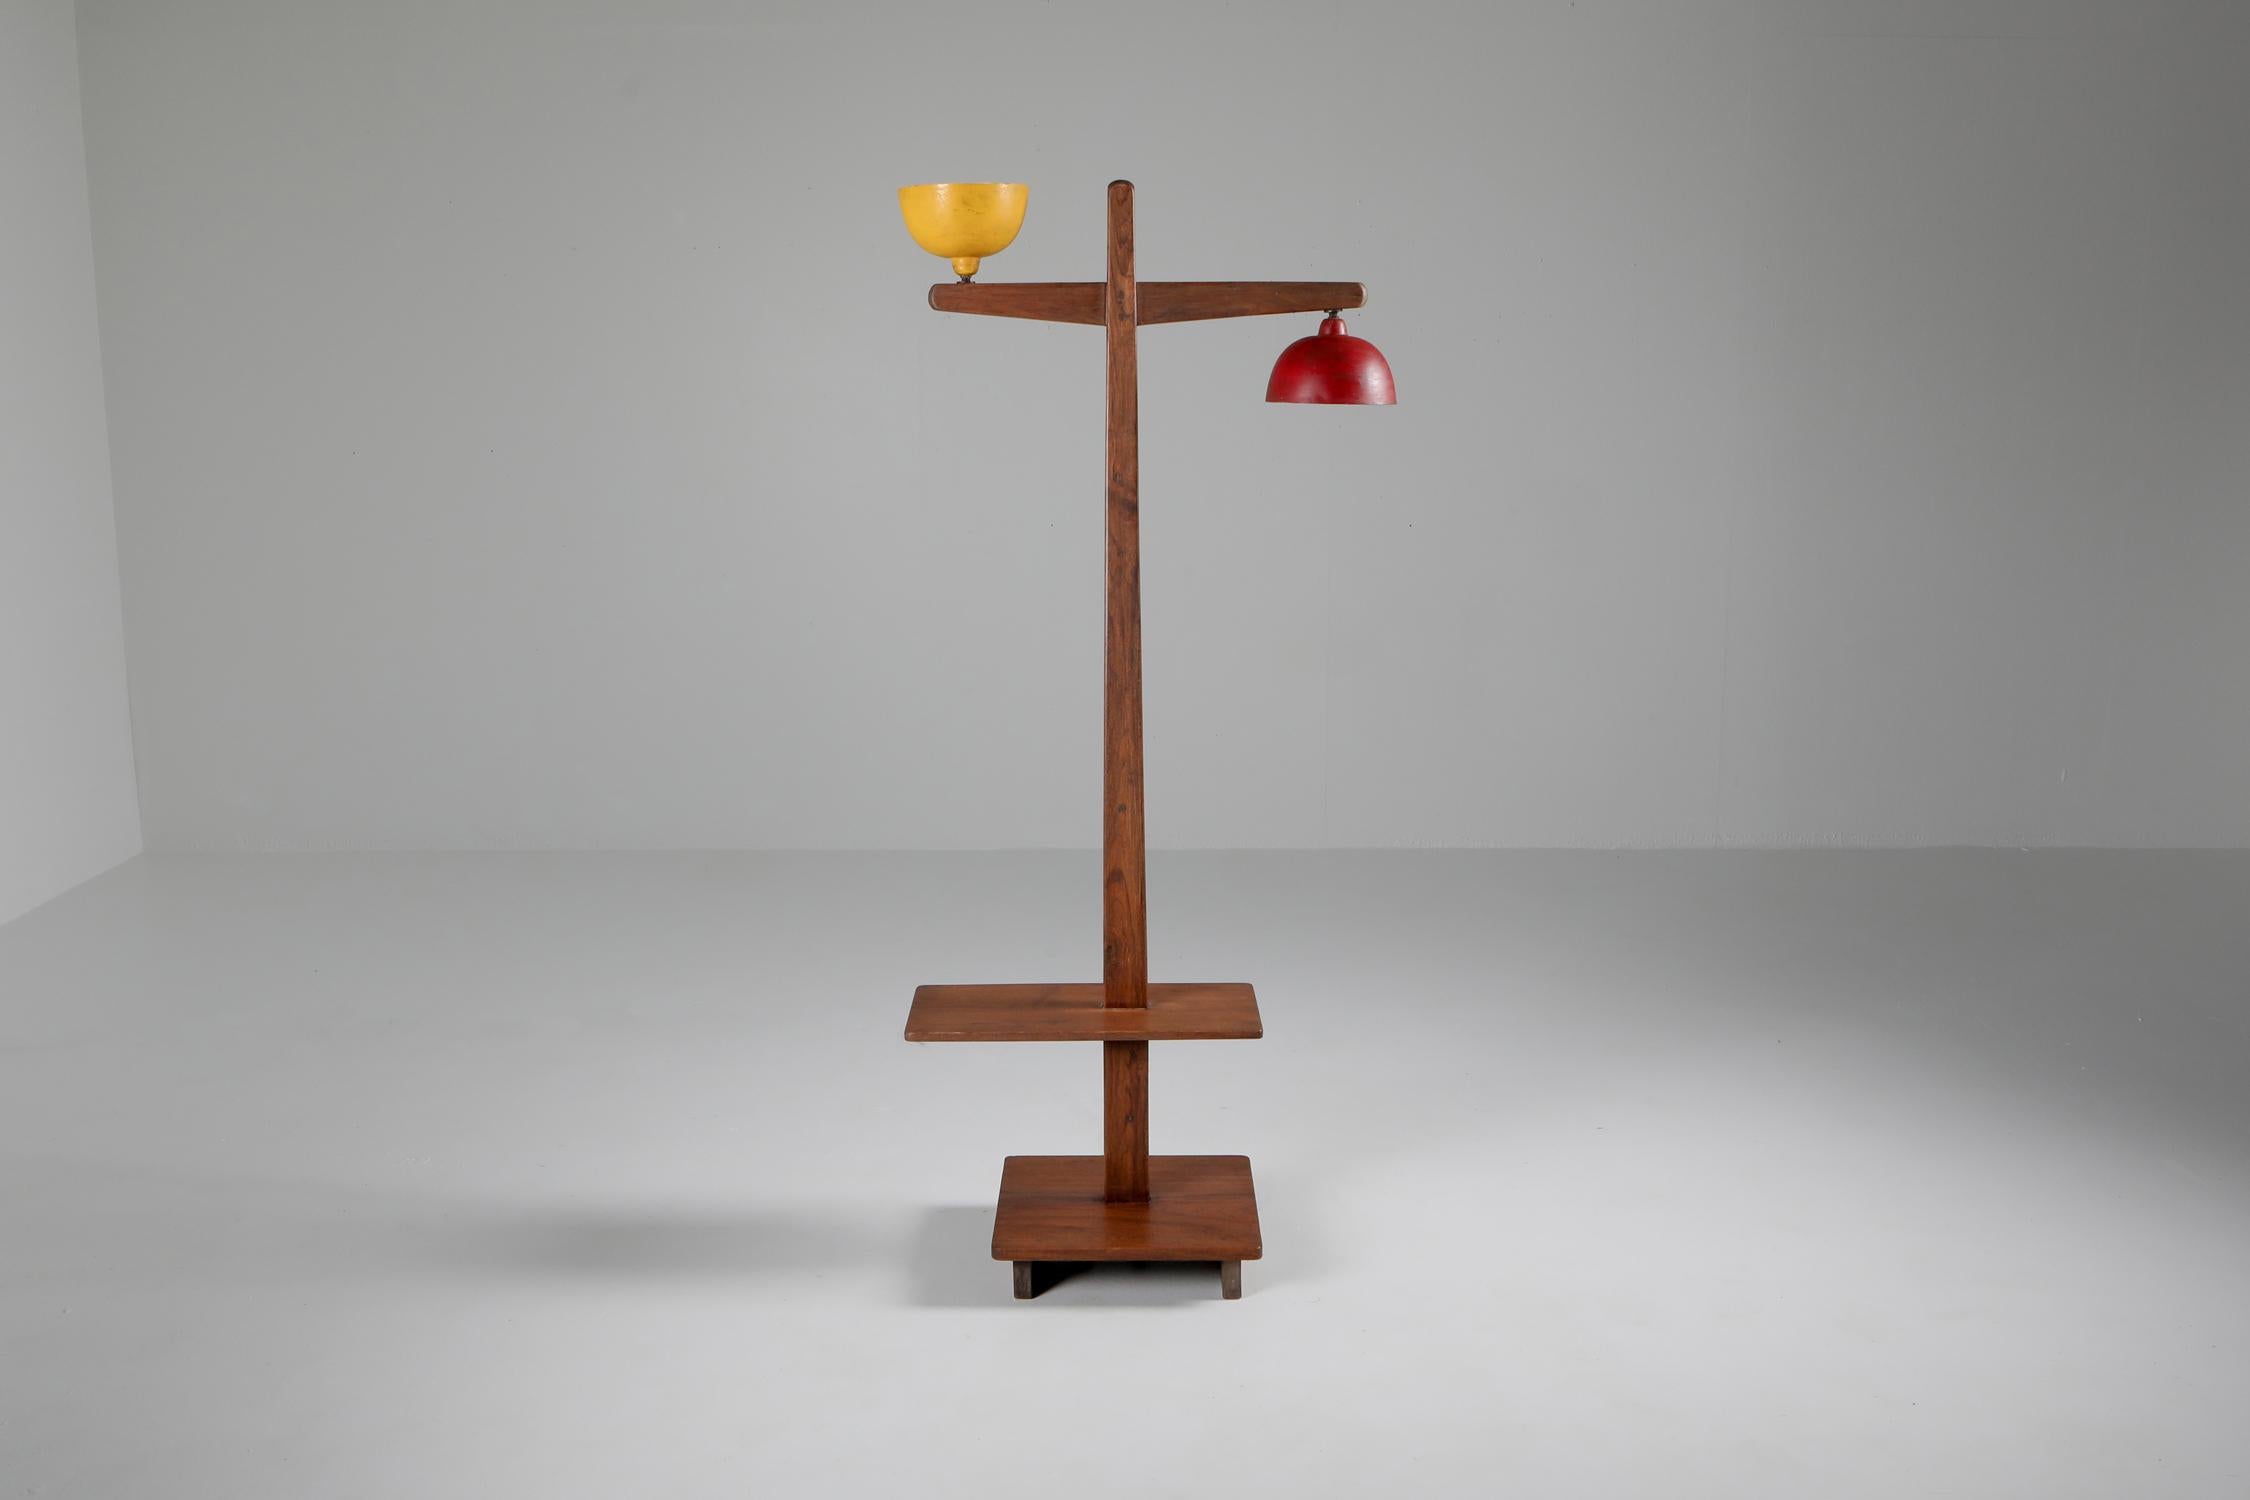 Jeanneret, chandigarh, teak lamp, circa 1955, in original condition

Lamp with two lights, known as 